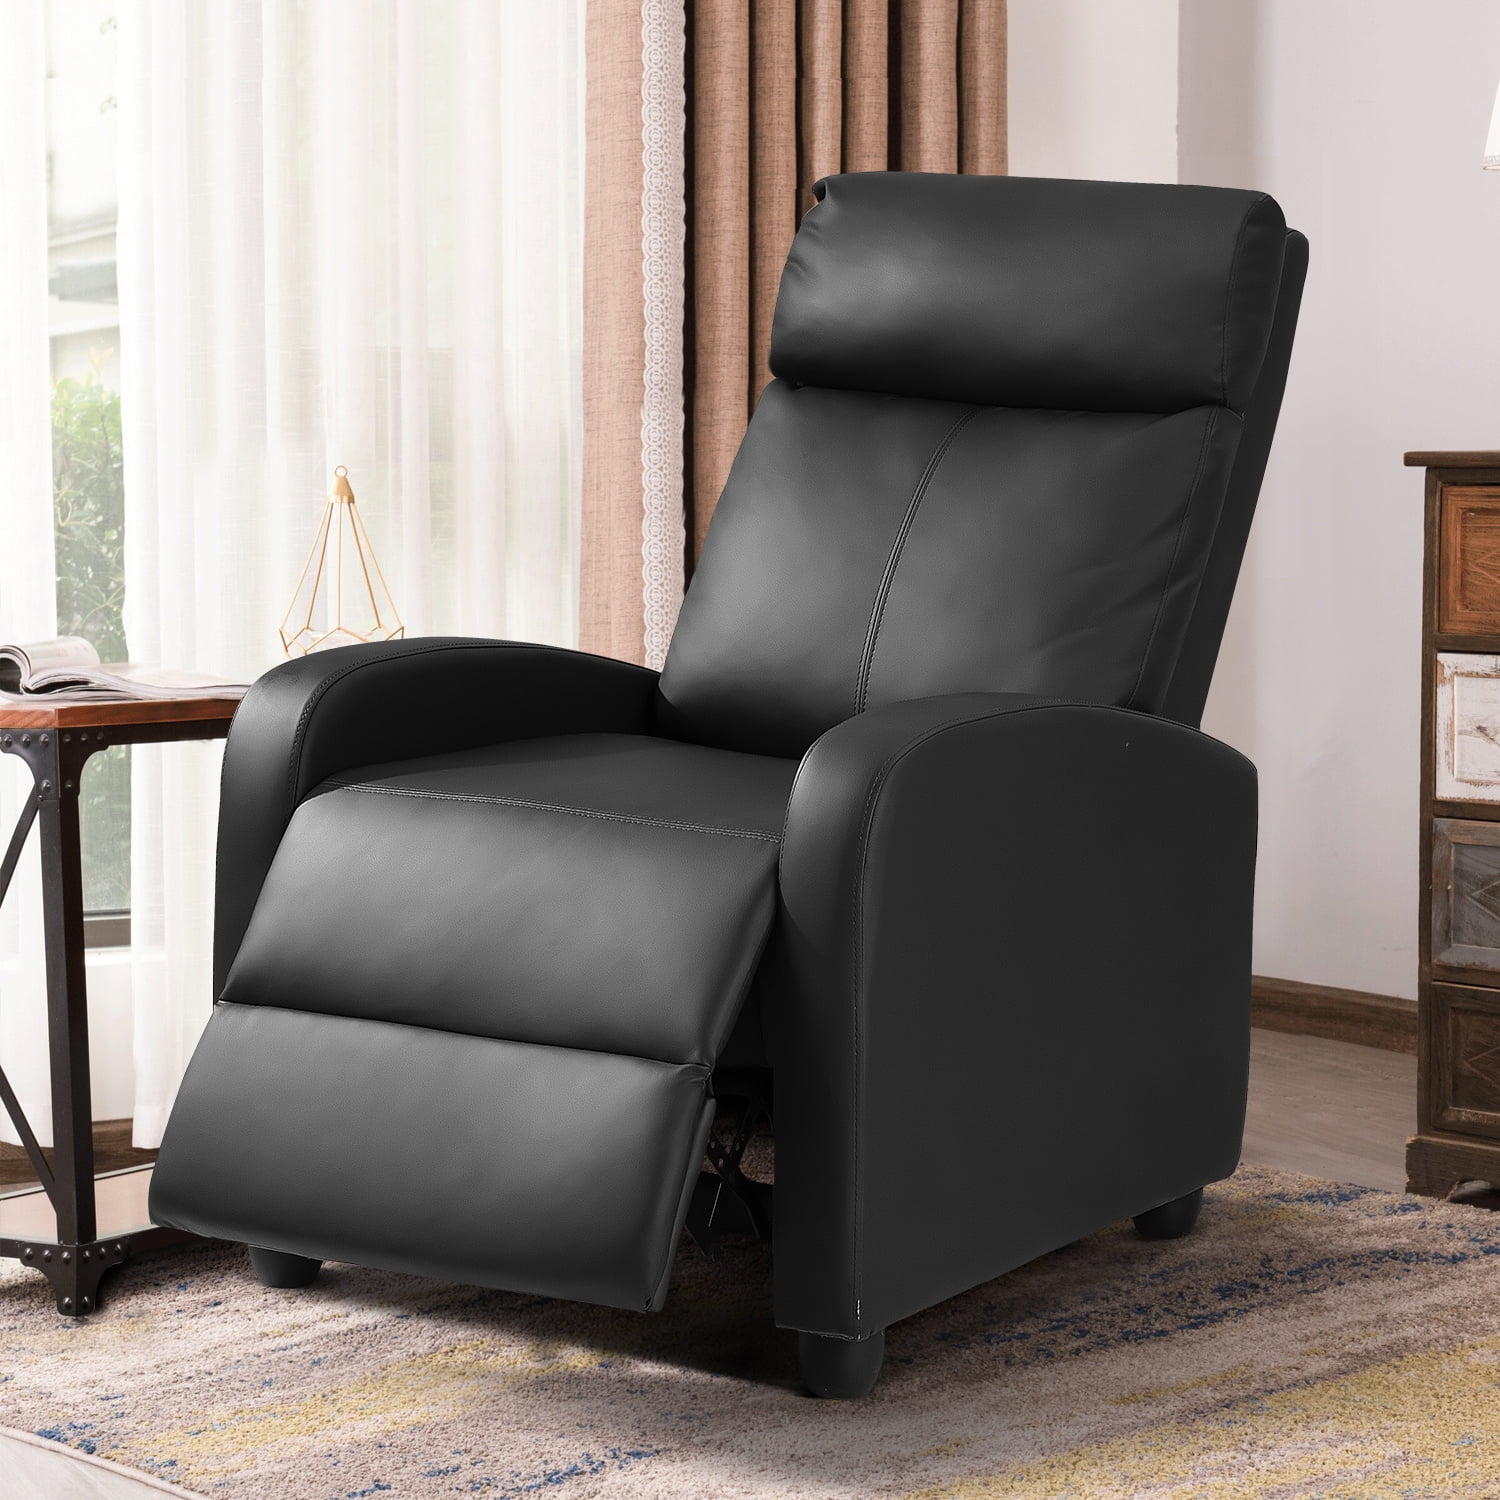 Homall Recliner Chair, Recliner Sofa PU Leather for Adults, Recliners Home  Theater Seating with Lumbar Support, Reclining Sofa Chair for Living Room